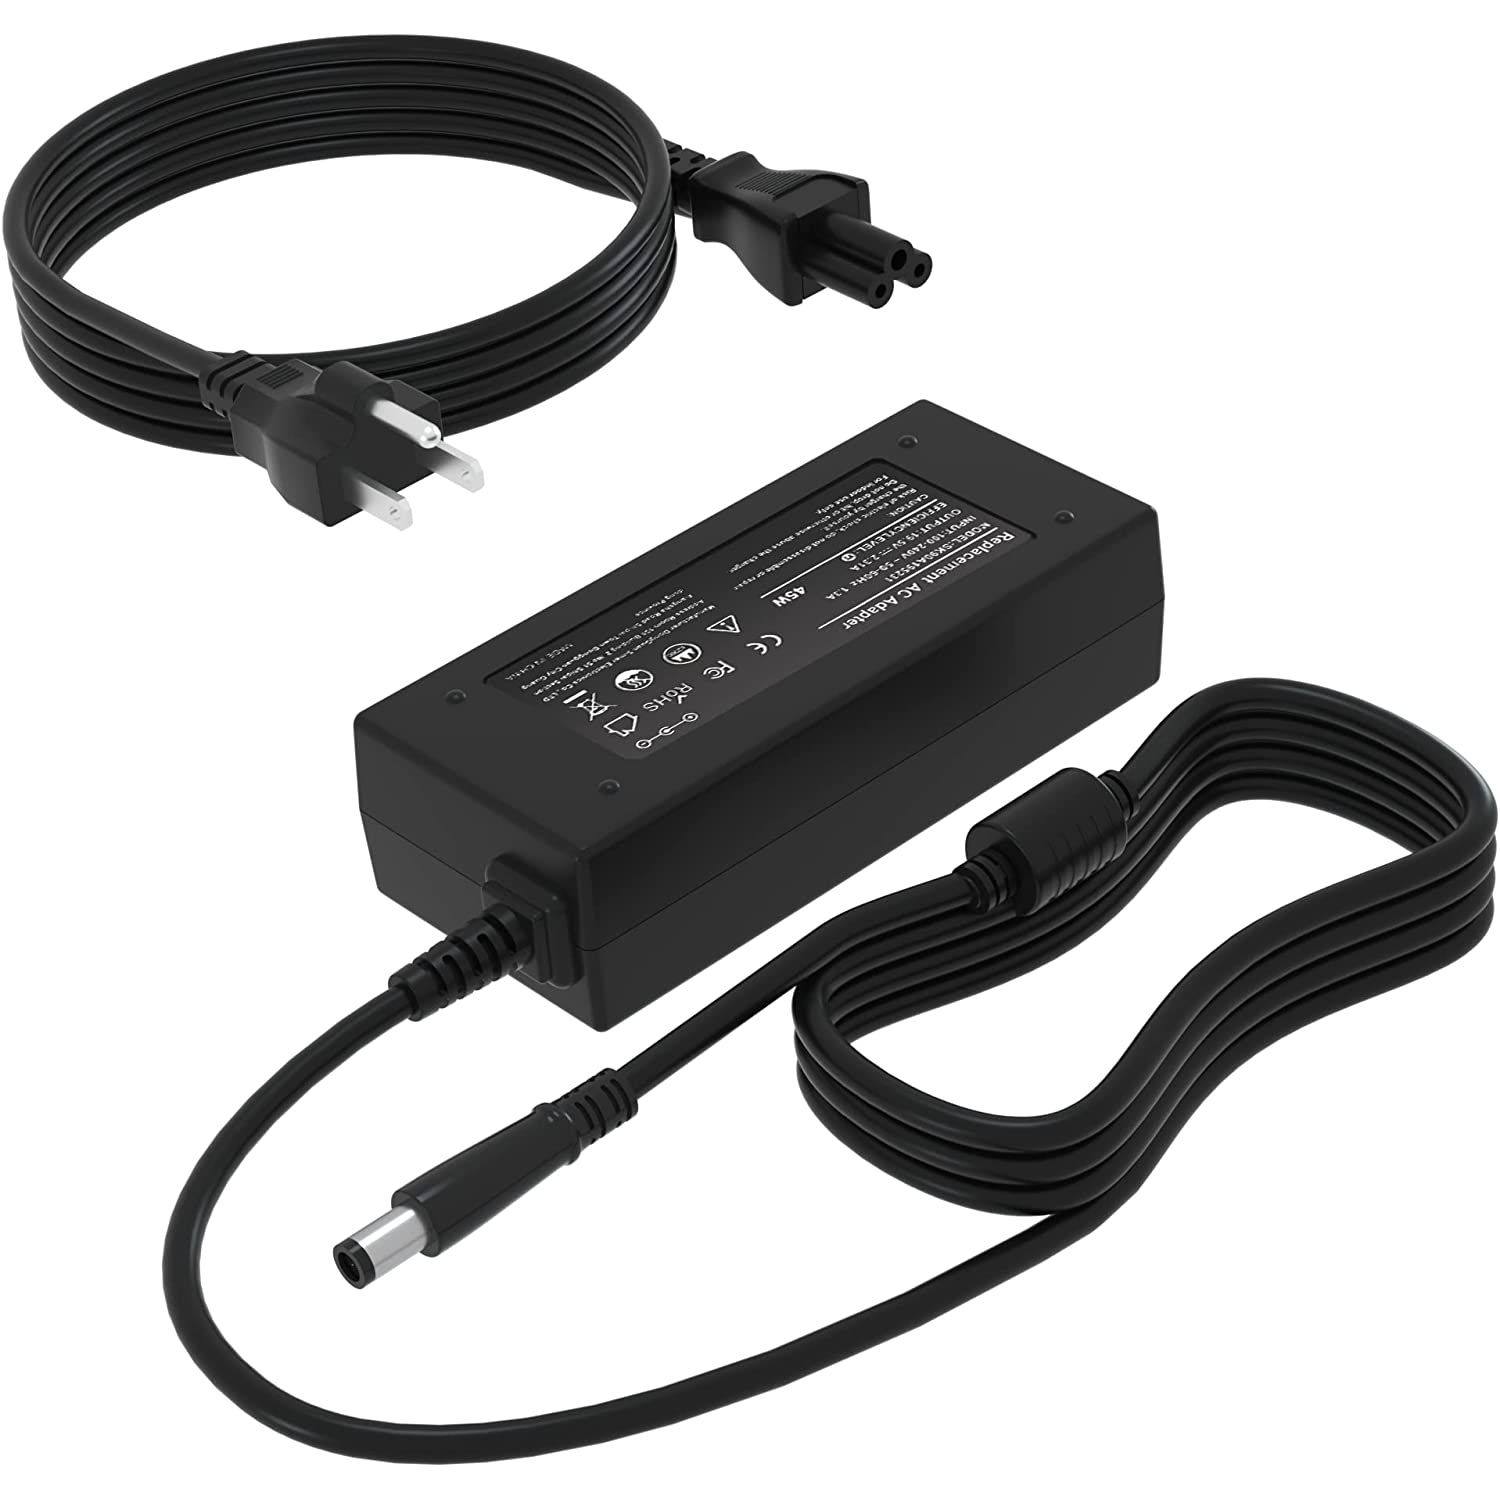 45W AC Adapter Replace for Dell Inspiron 13 14 15 7000 5000 3000 Series 3147 3168 5378 7348 7352 7353 7378 3558 3567